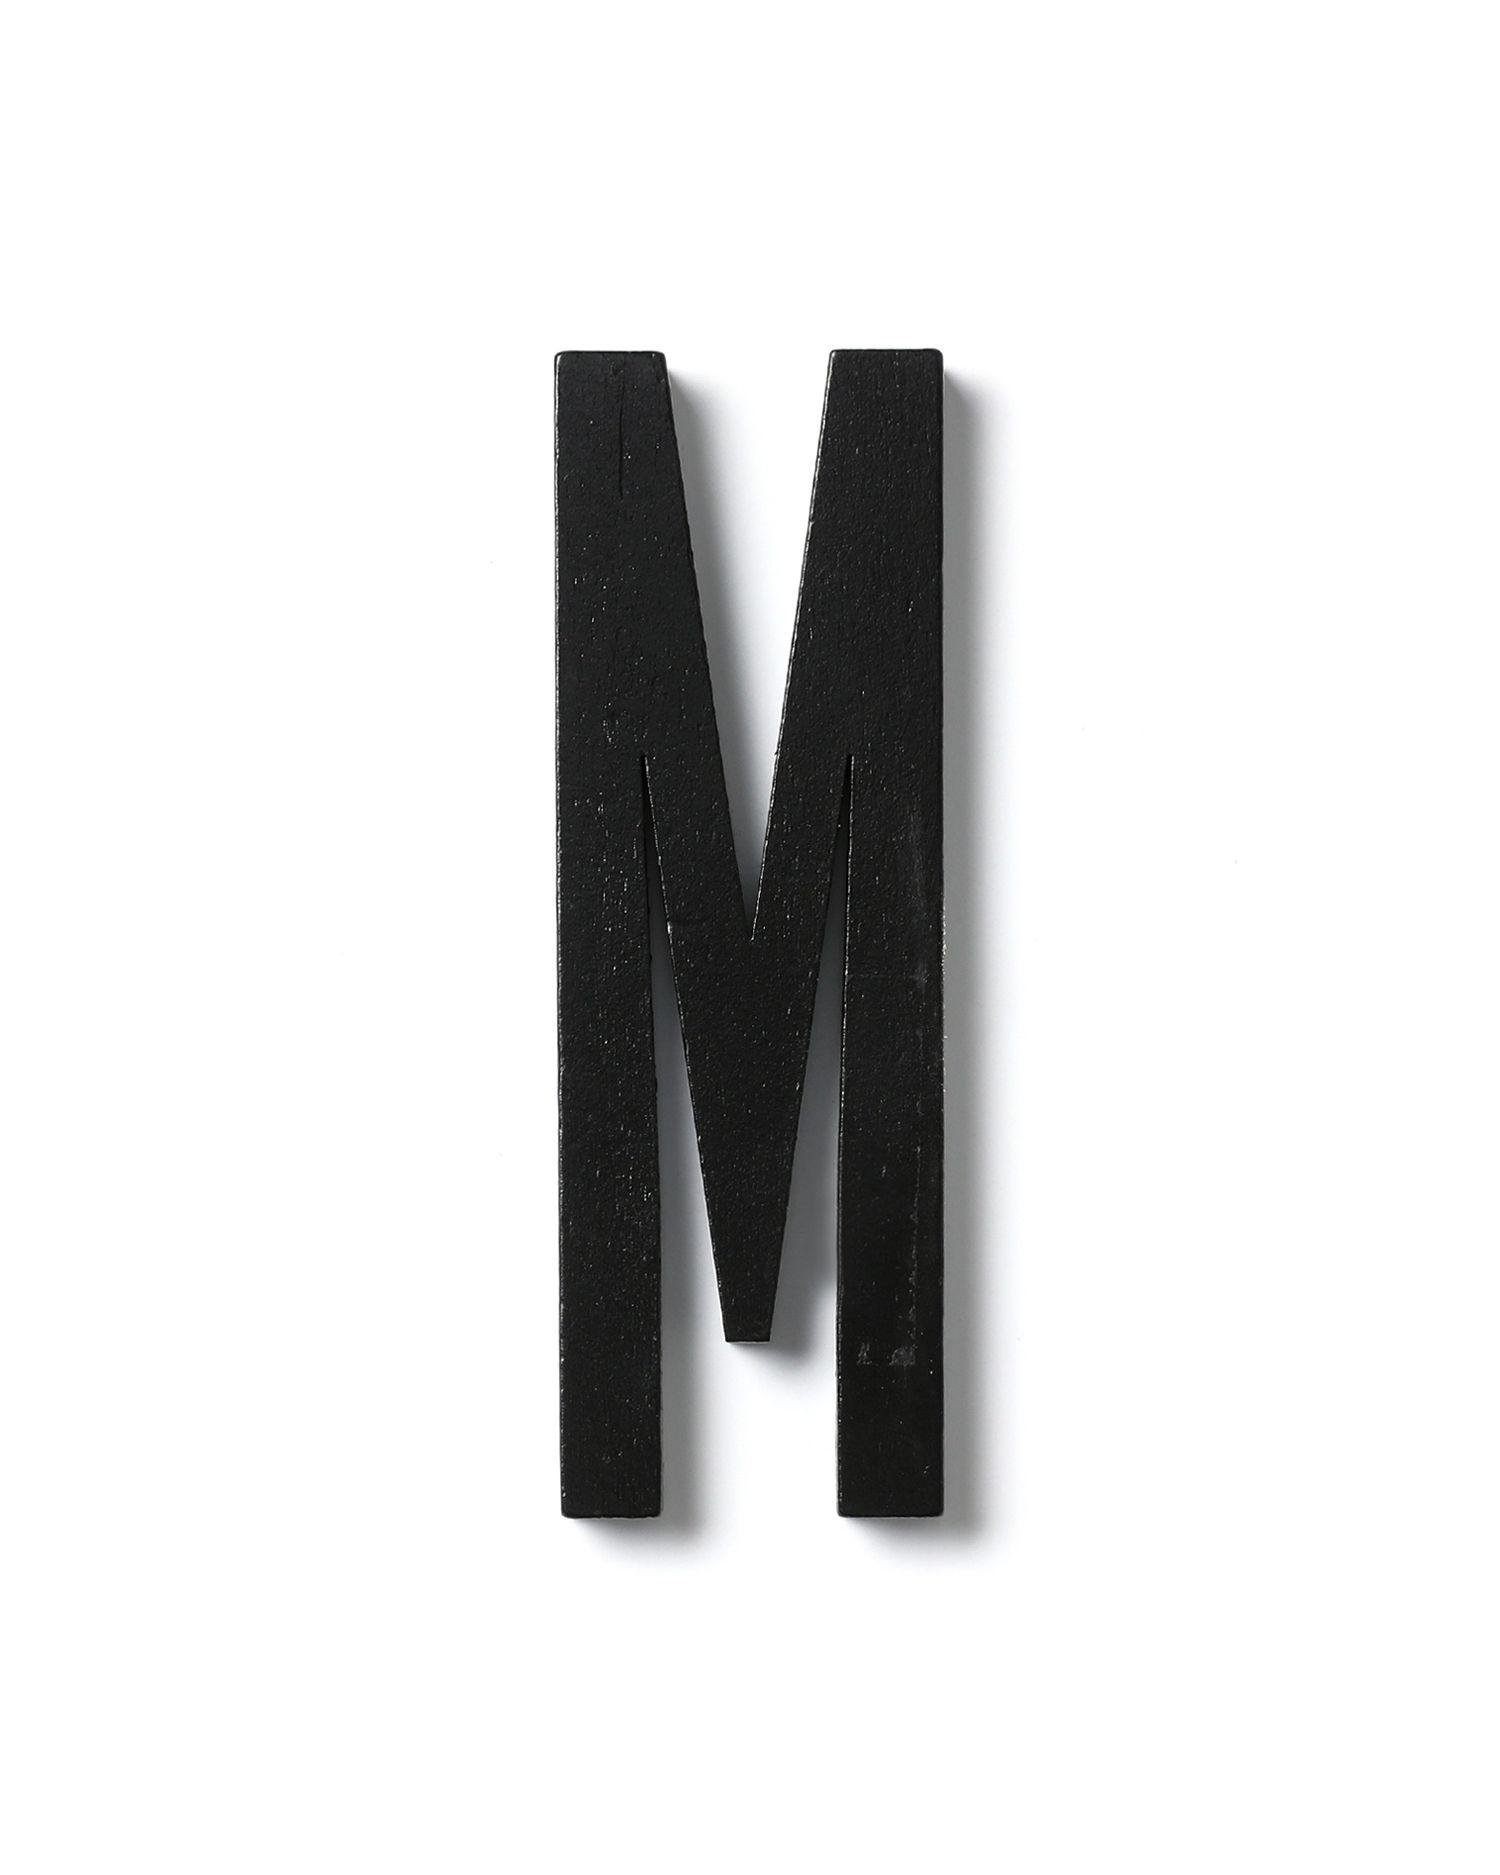 Letter M display by DESIGN LETTERS